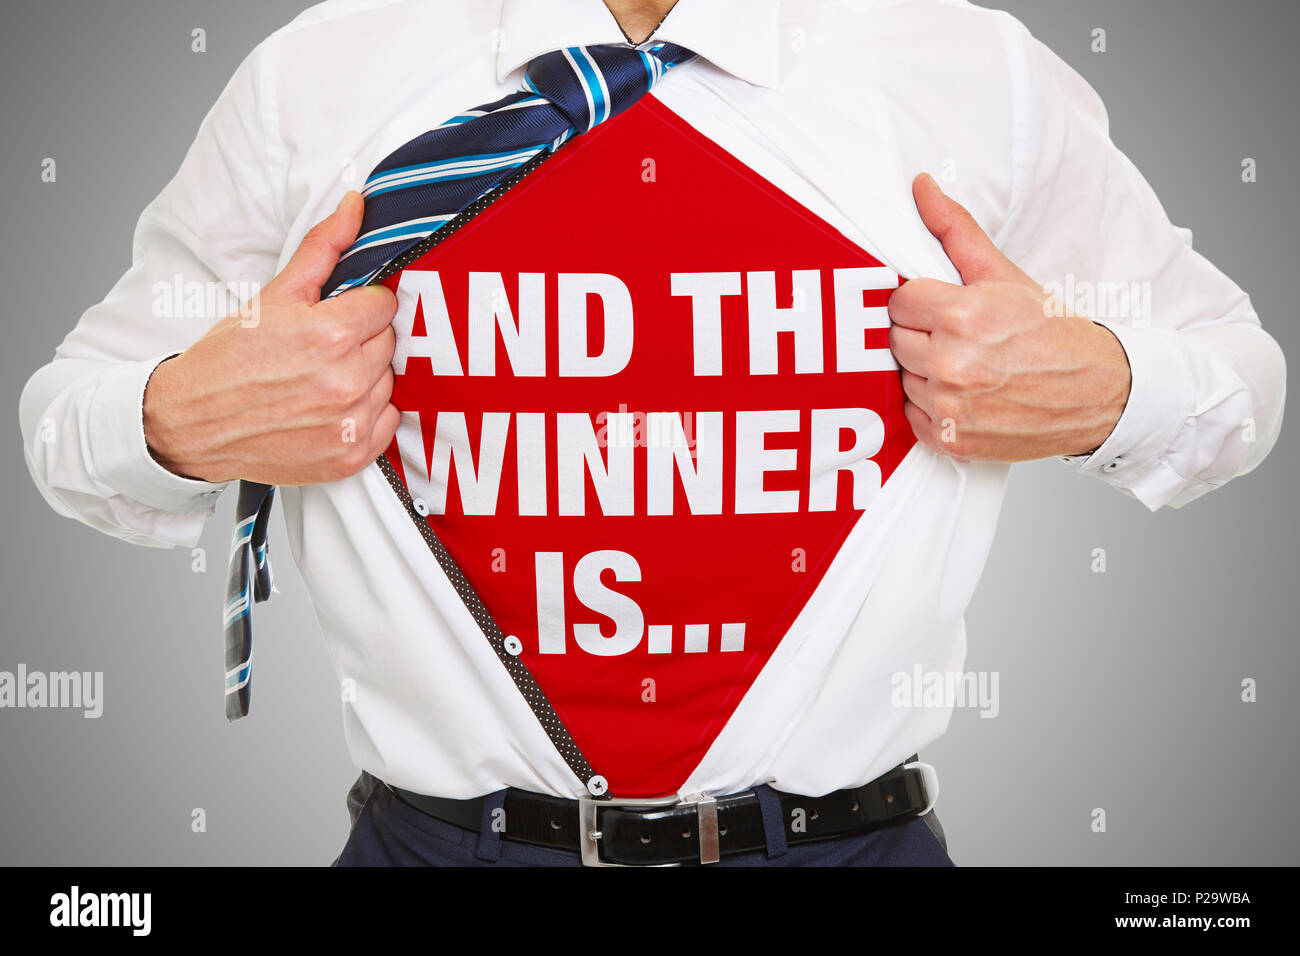 Man reveals slogan 'And the winner is' on t-shirt underneath his business shirt Stock Photo